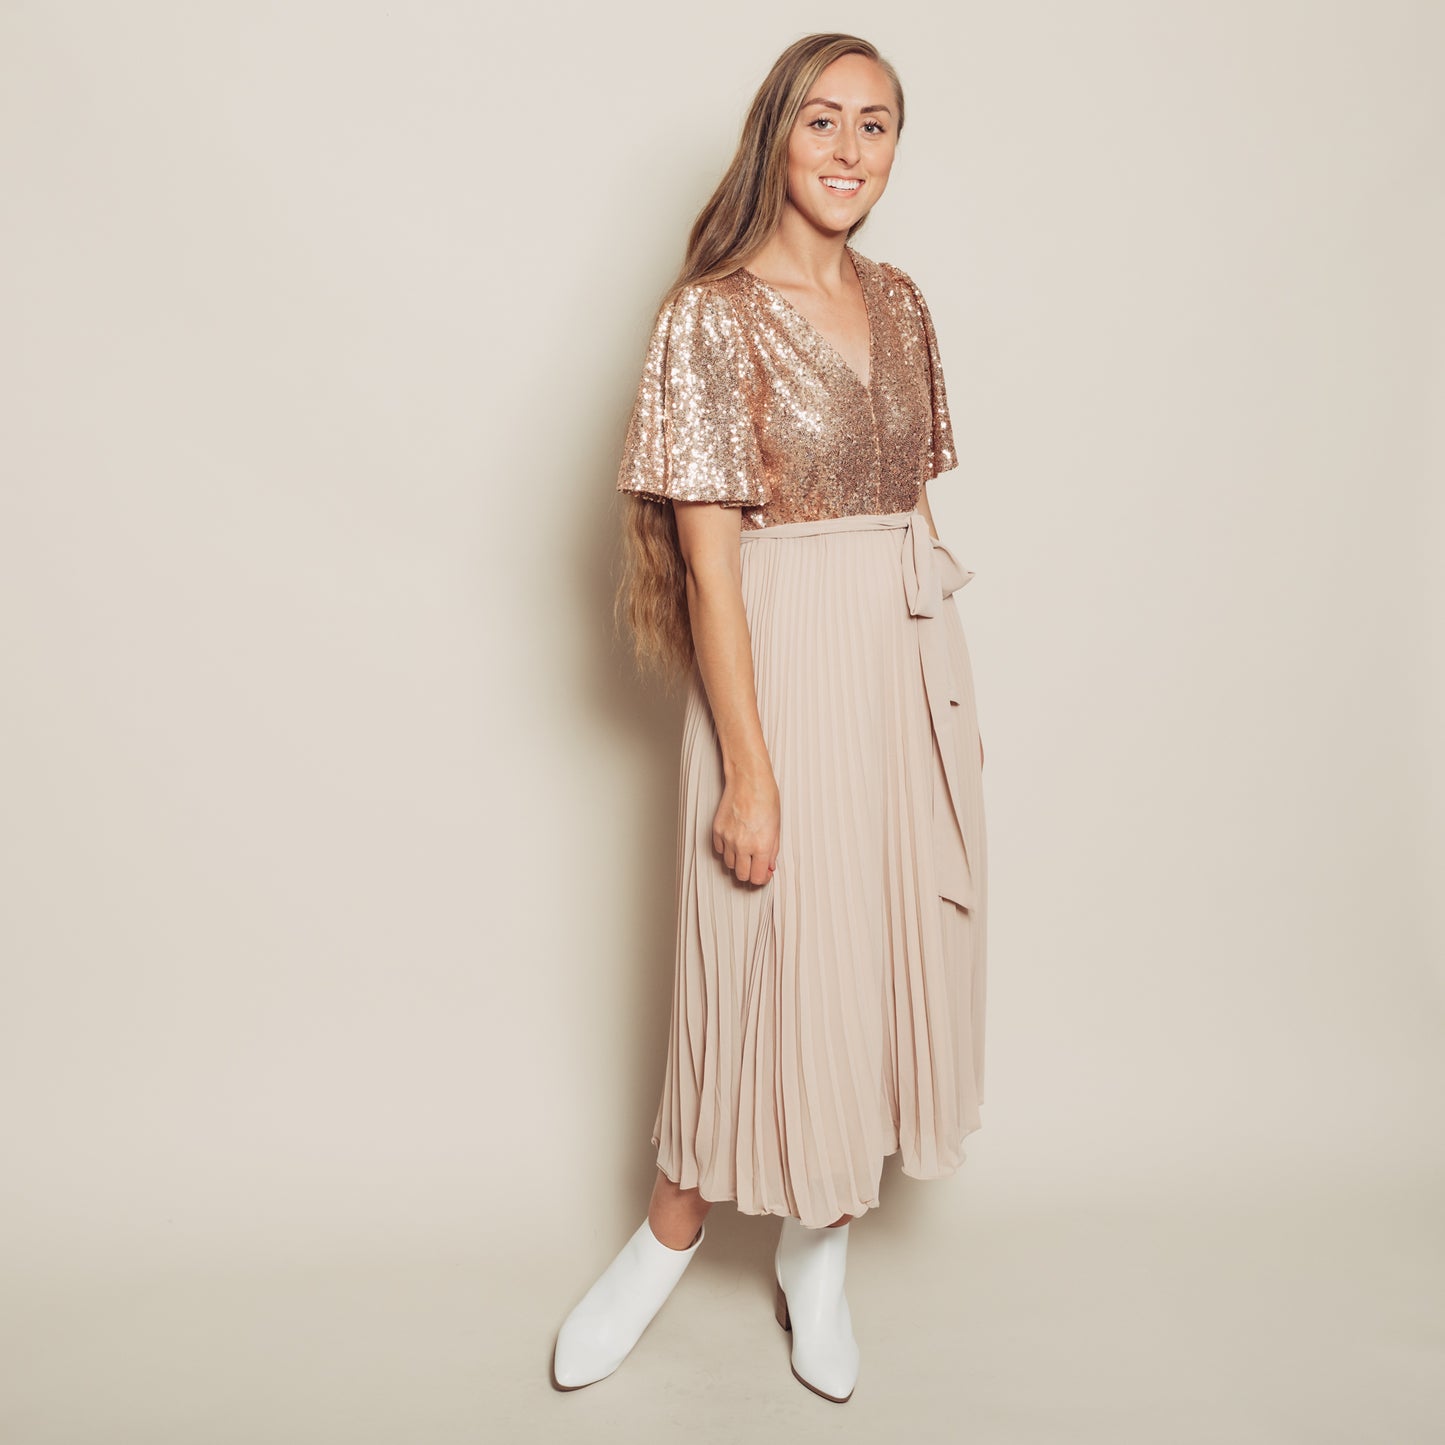 Cailey Dress | Rose Gold